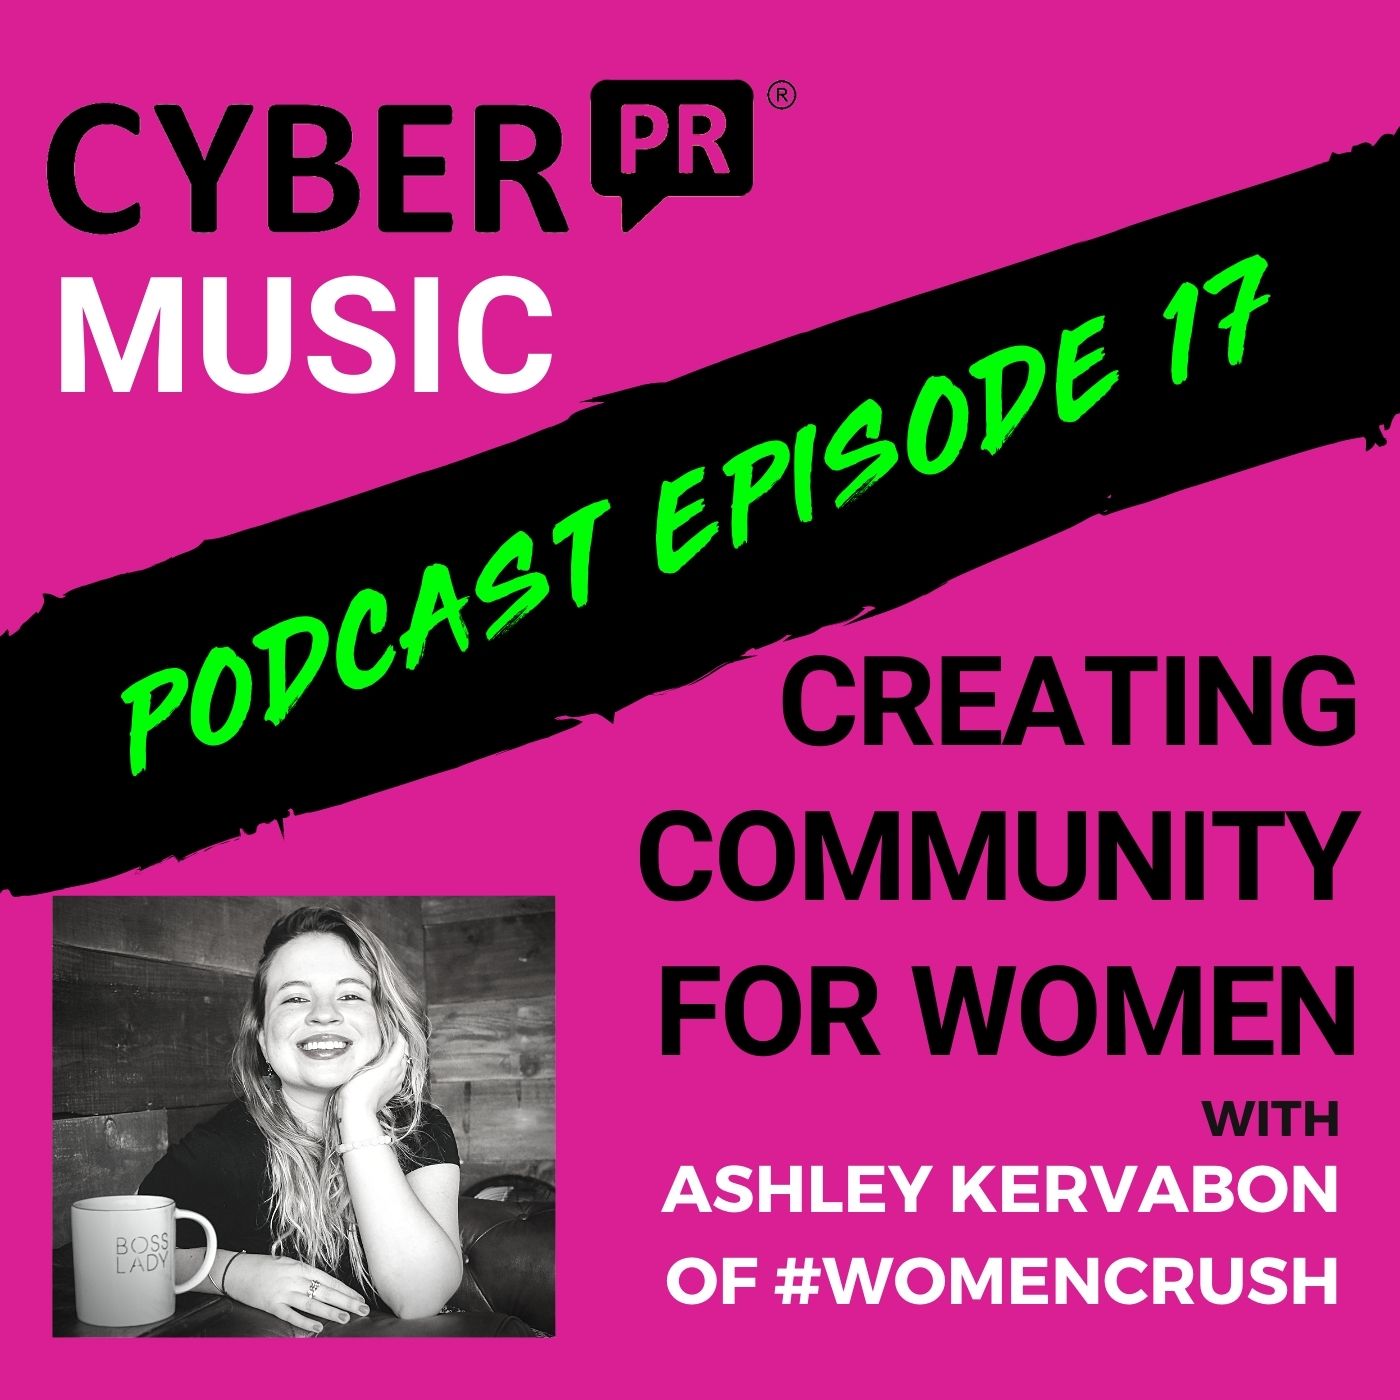 The Cyber PR Music Podcast EP 17: Creating Community with Ashley Kervabon